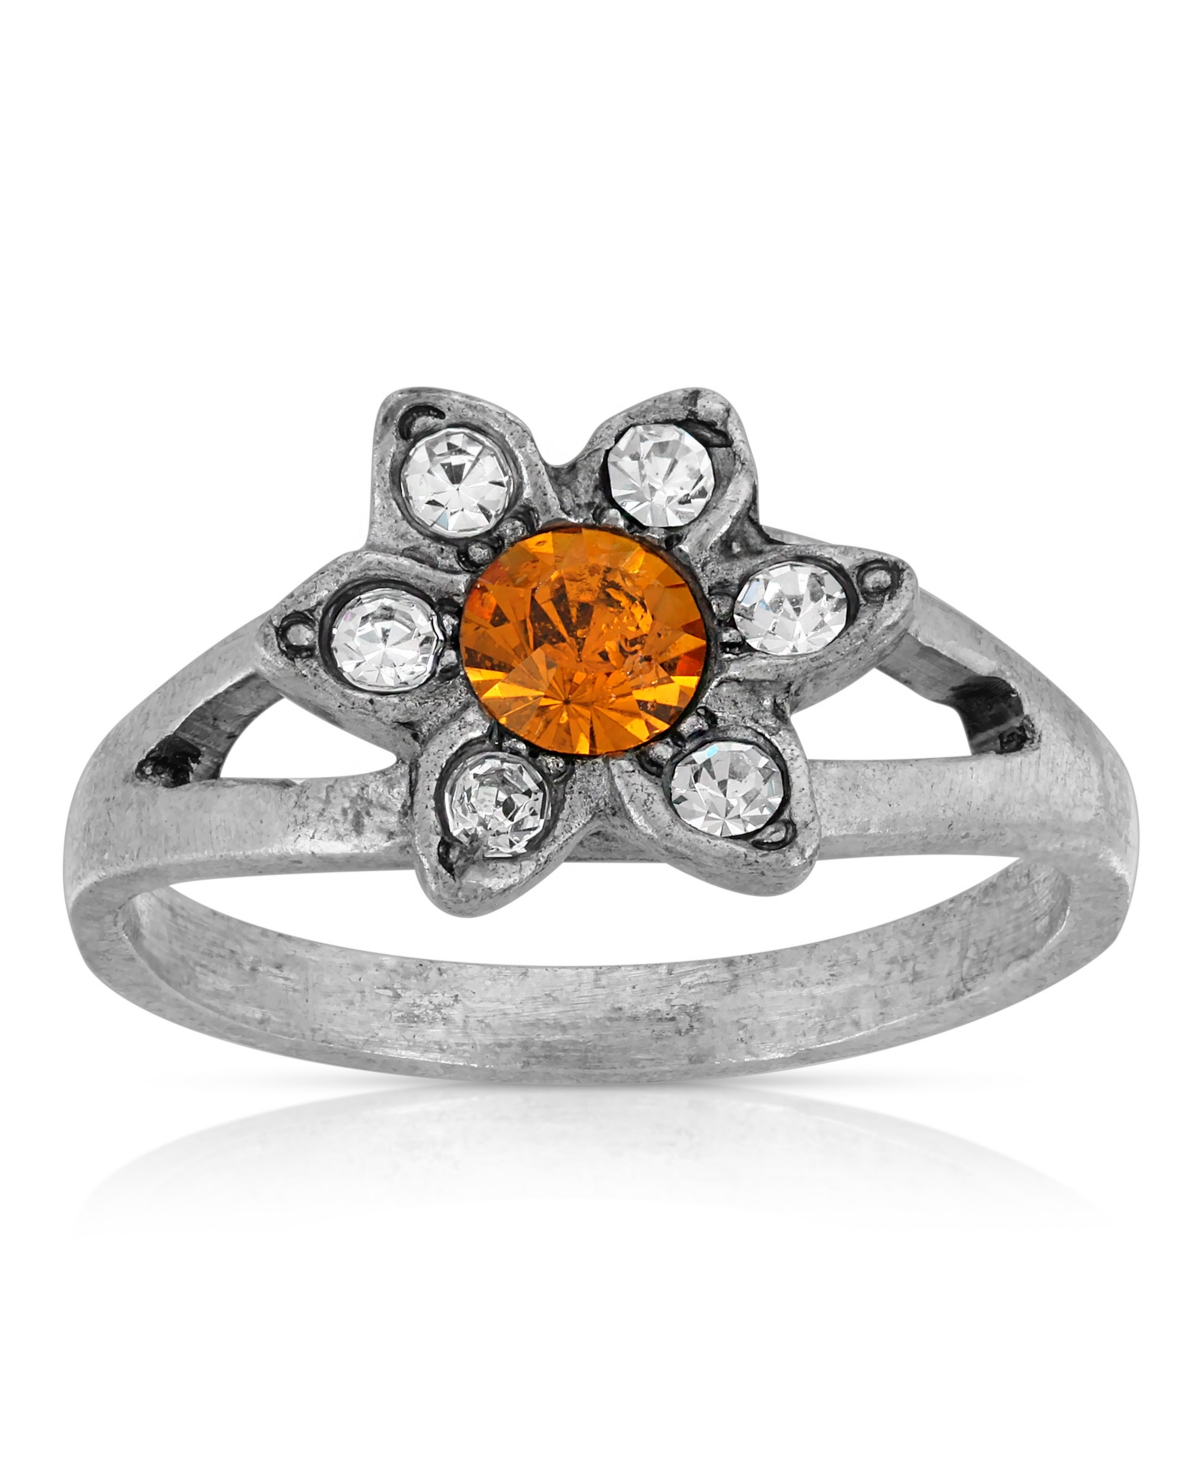 2028 Pewter And Clear Crystal Flower Ring In Yellow